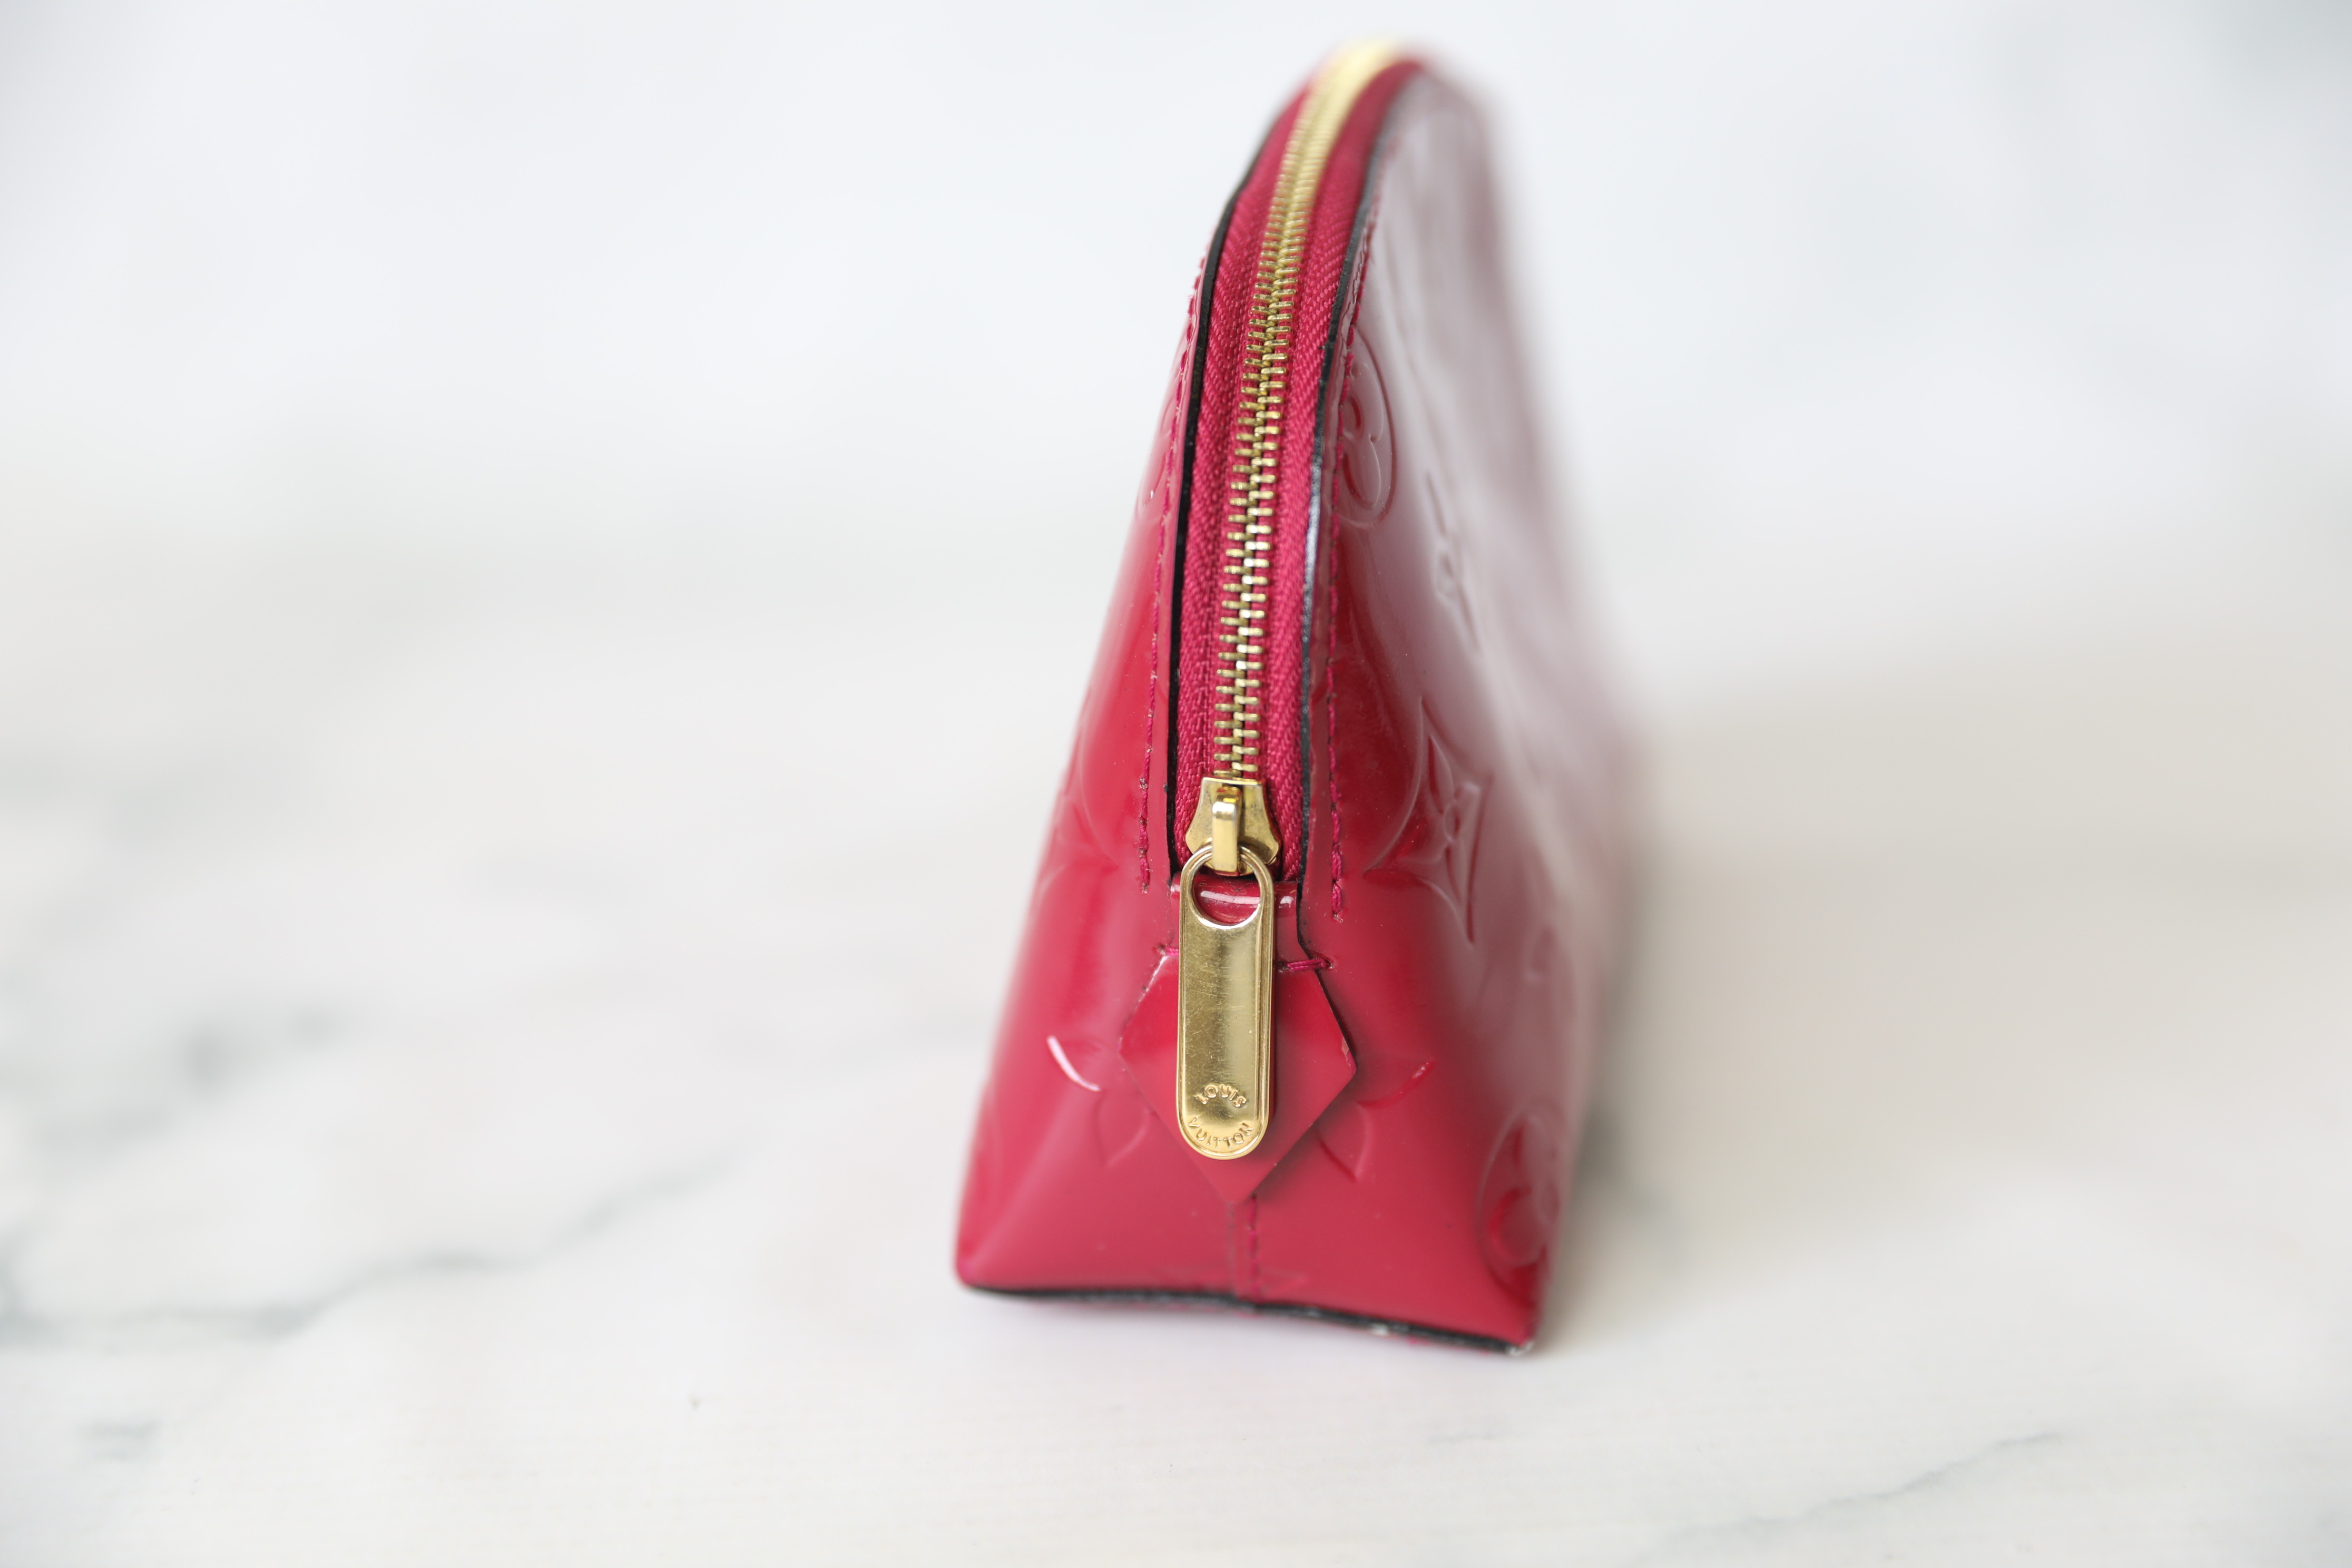 Louis Vuitton Vernis Pouch Vanity Bag Cosmetic Makeup Red 17x12x6cm F/S